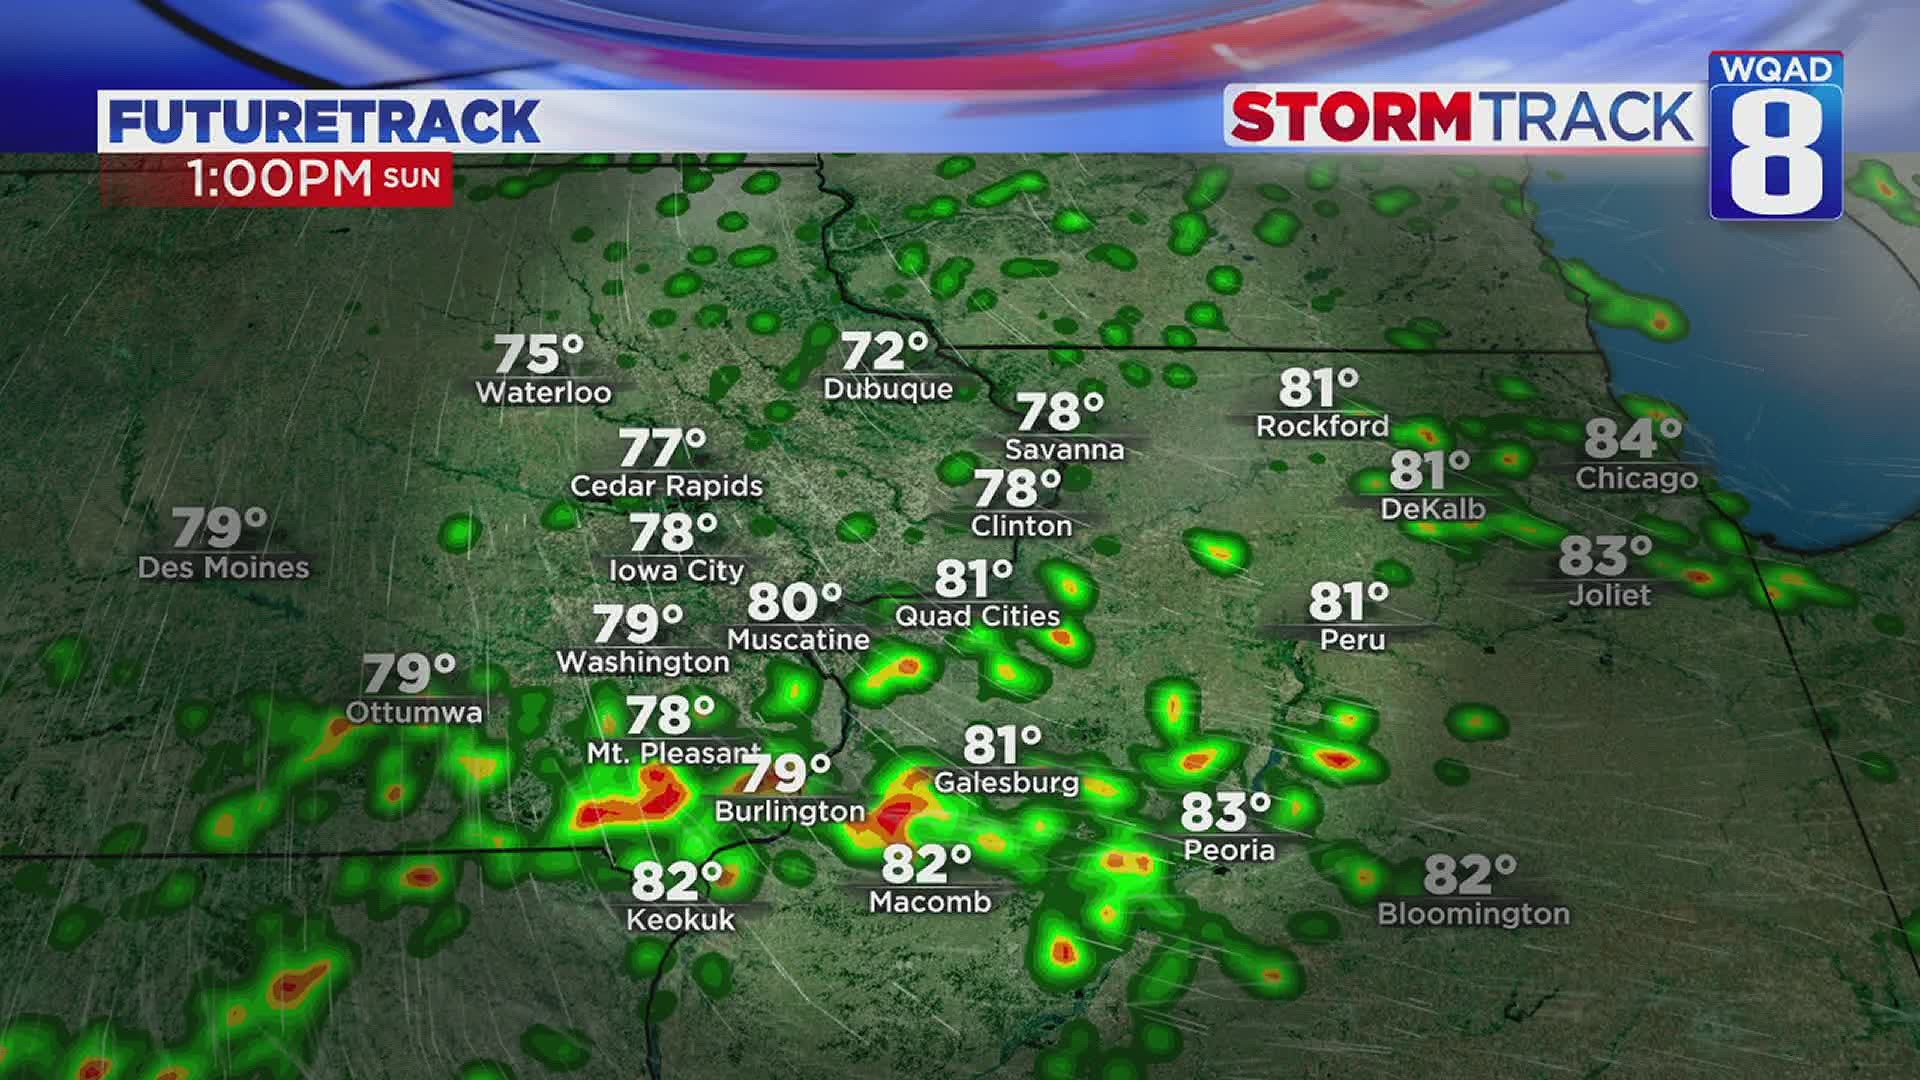 Showers and storms this afternoon will cool things down.